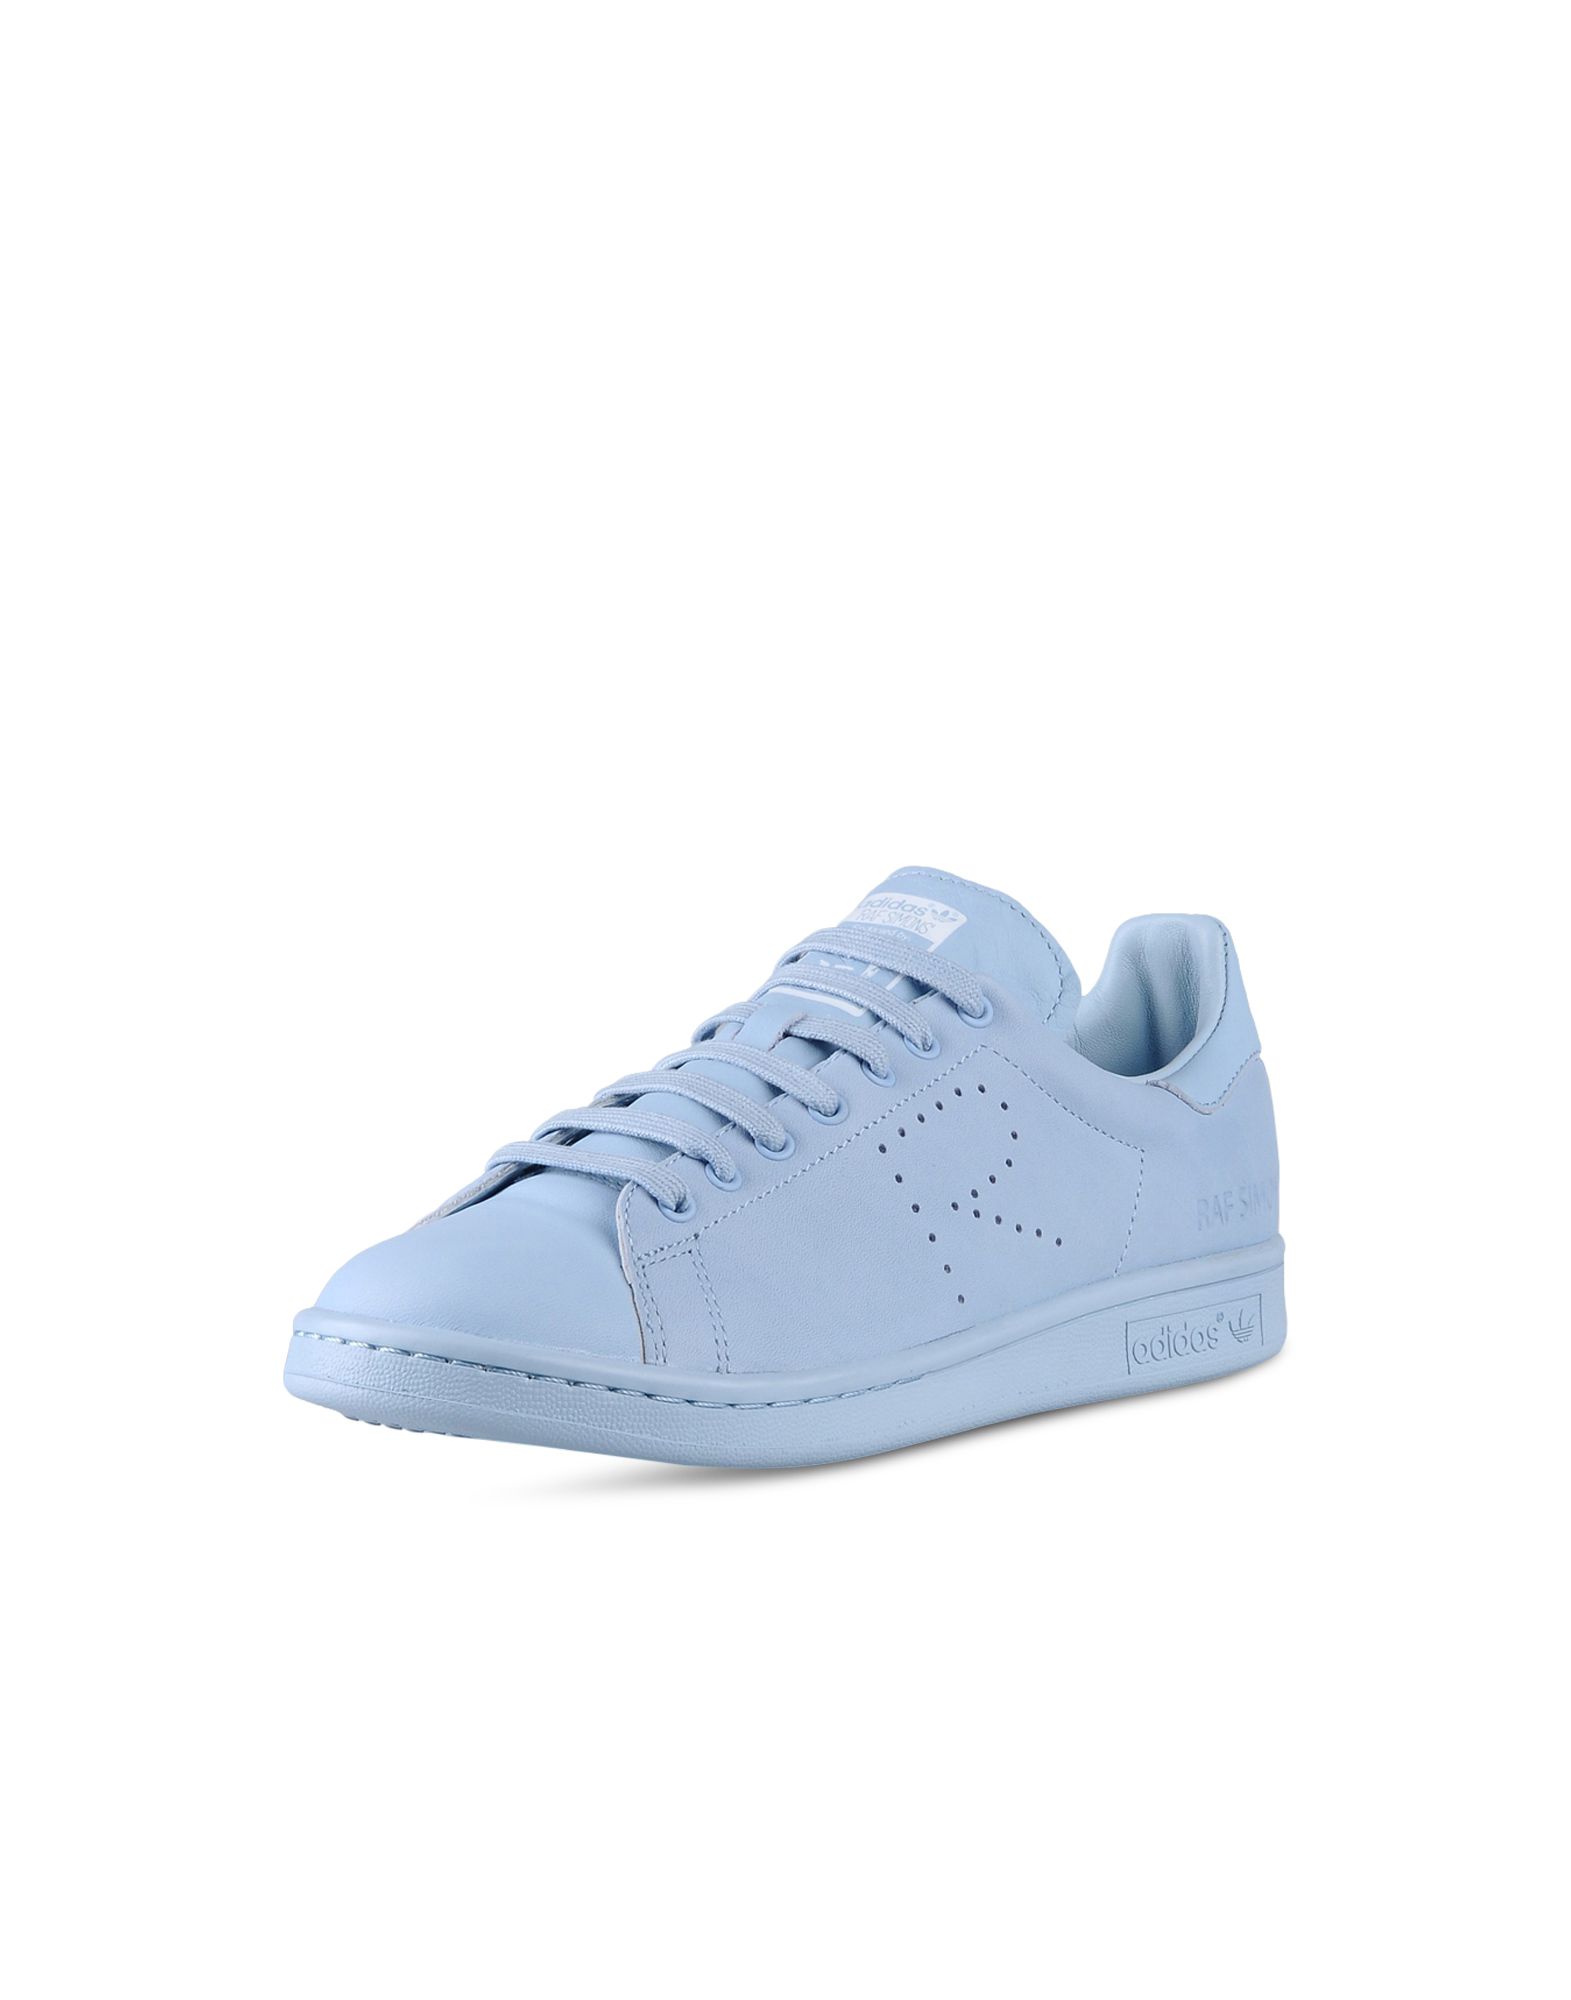 Adidas By RAF SIMONS STAN SMITH Sneakers | Adidas Y-3 Official Store